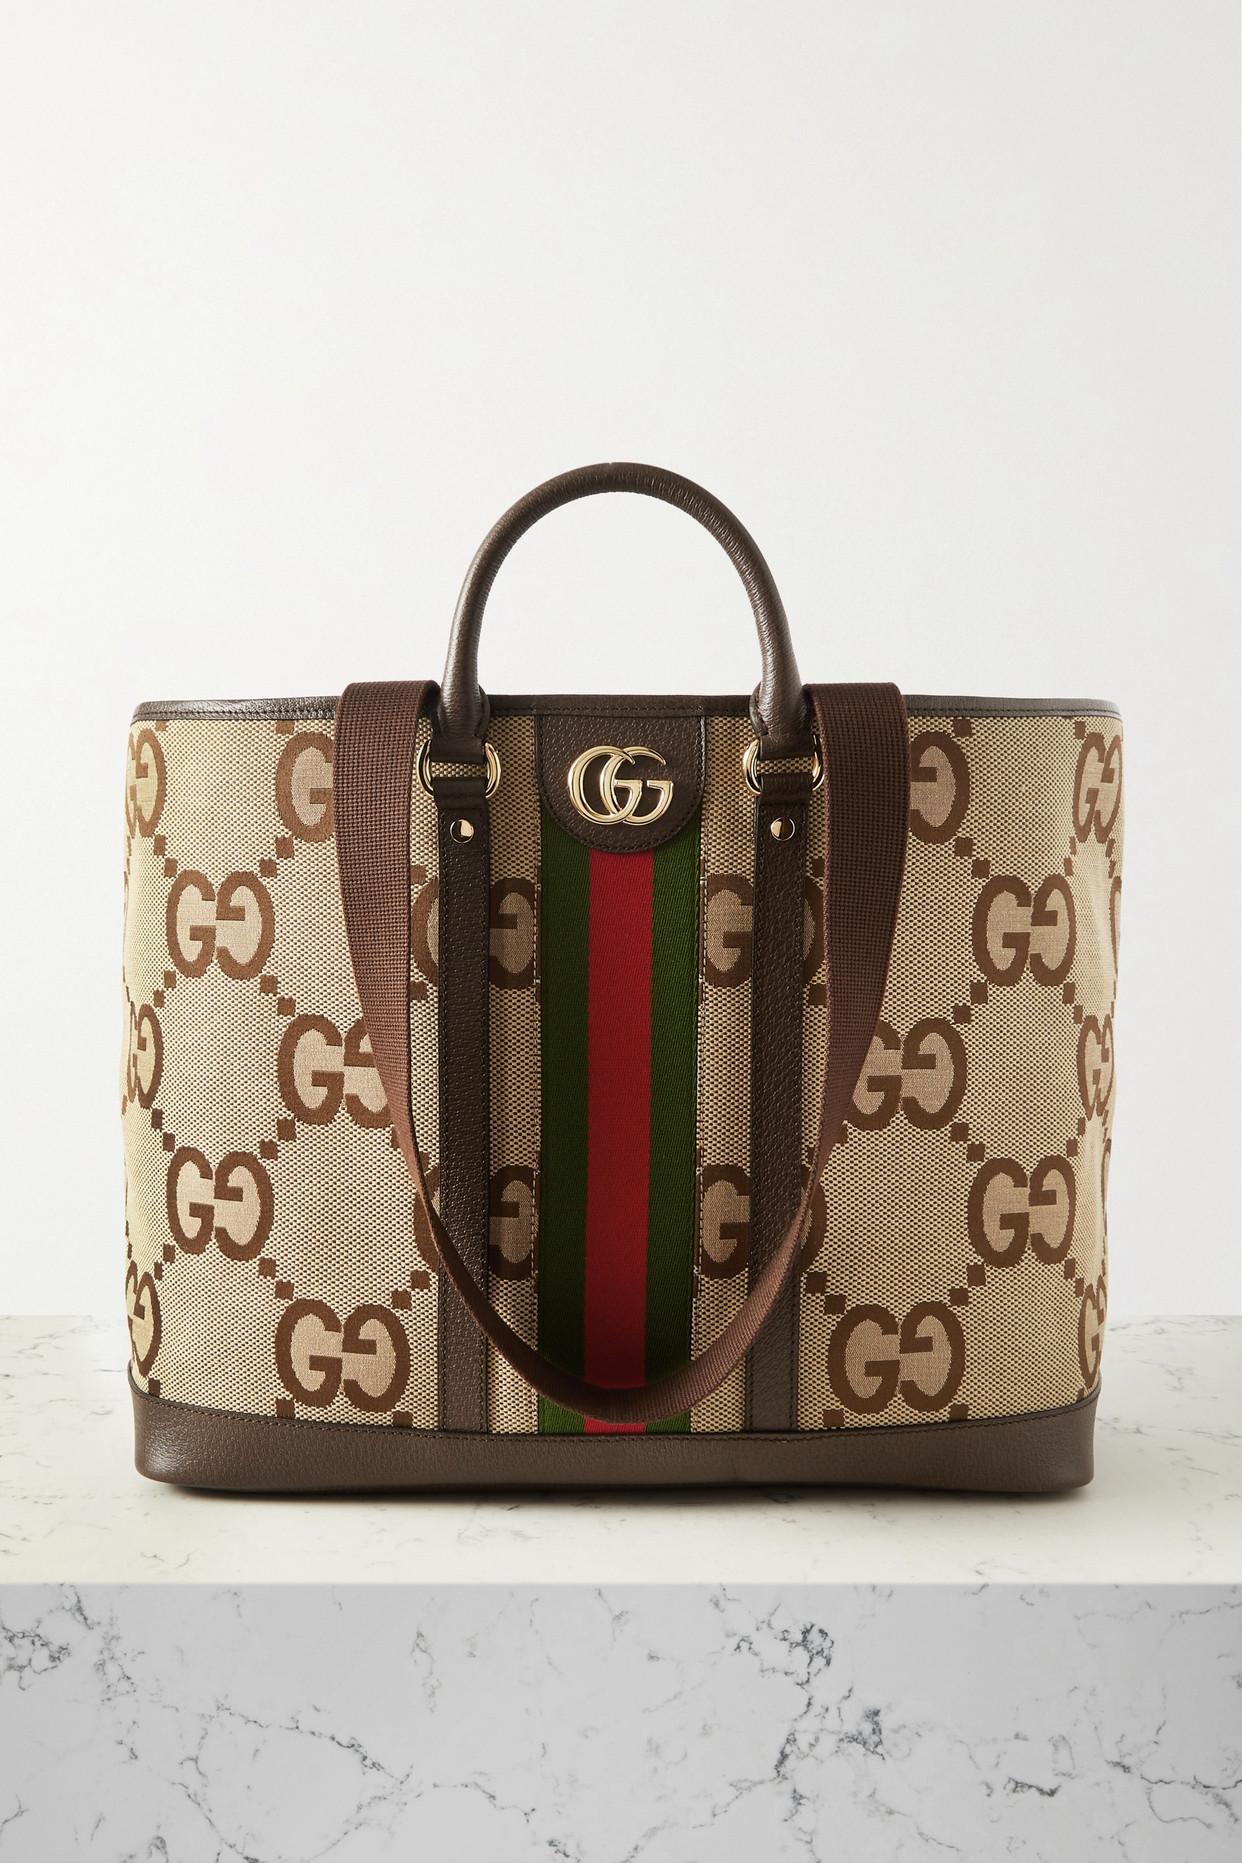 Gucci GG Mini Leather-trimmed Printed Coated-canvas Tote - Blue - One Size